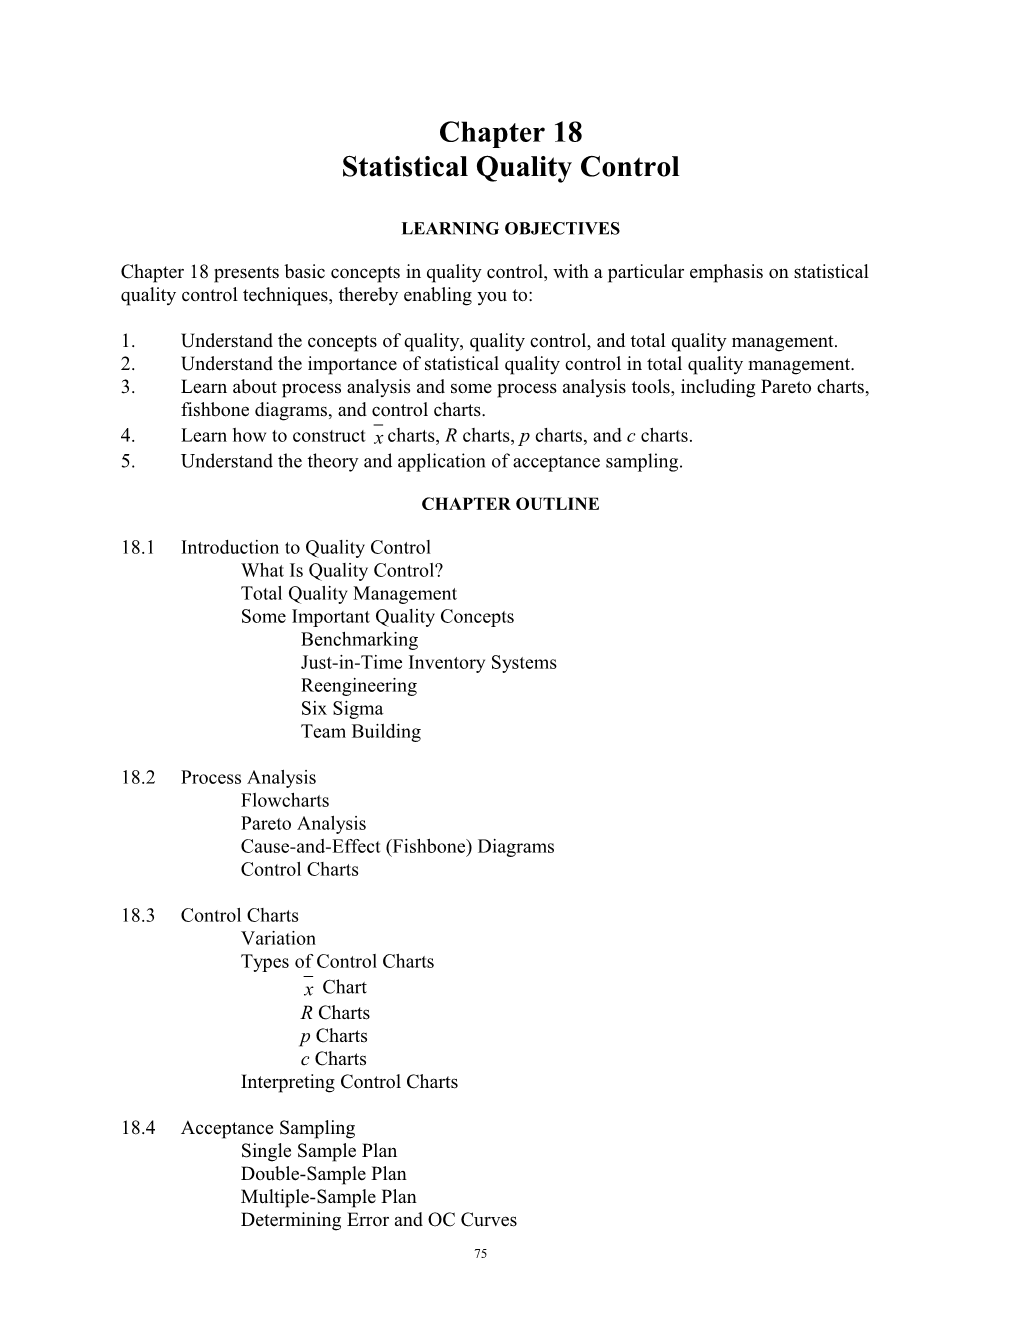 Chapter 18: Statistical Quality Control 1